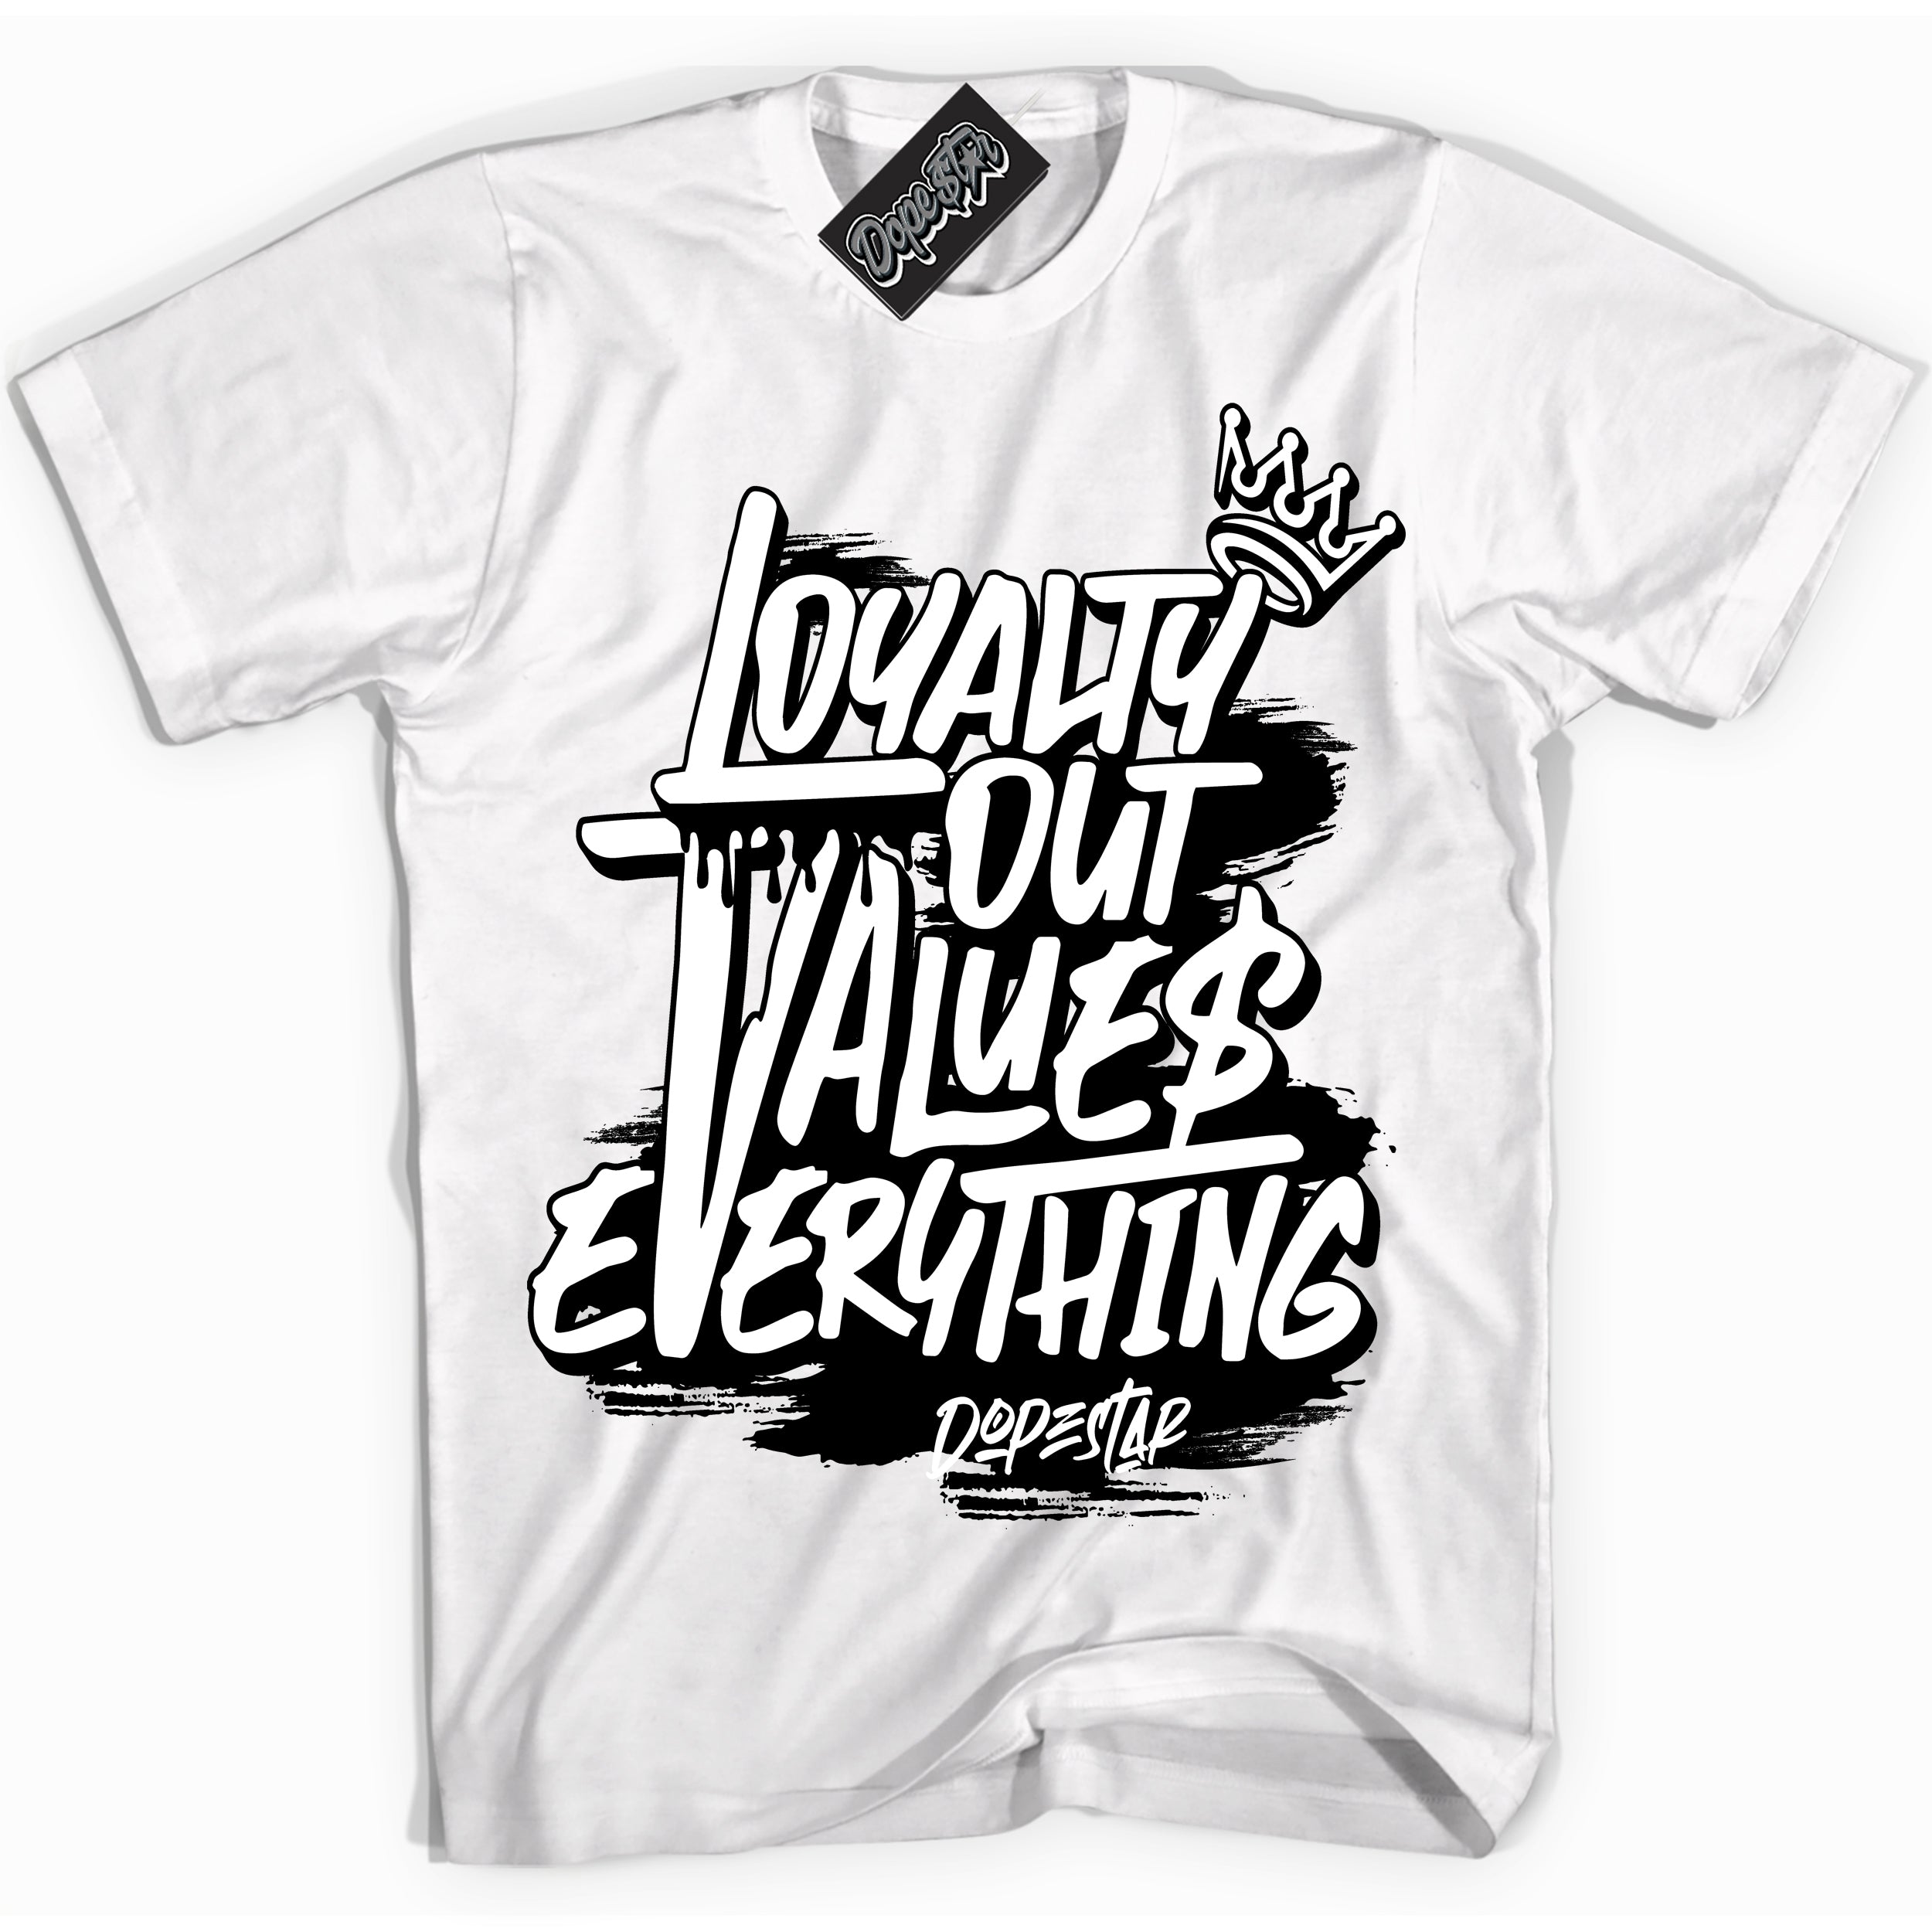 Cool White Shirt with “ Loyalty Out Values Everything” design that perfectly matches Black White 1s Sneakers.